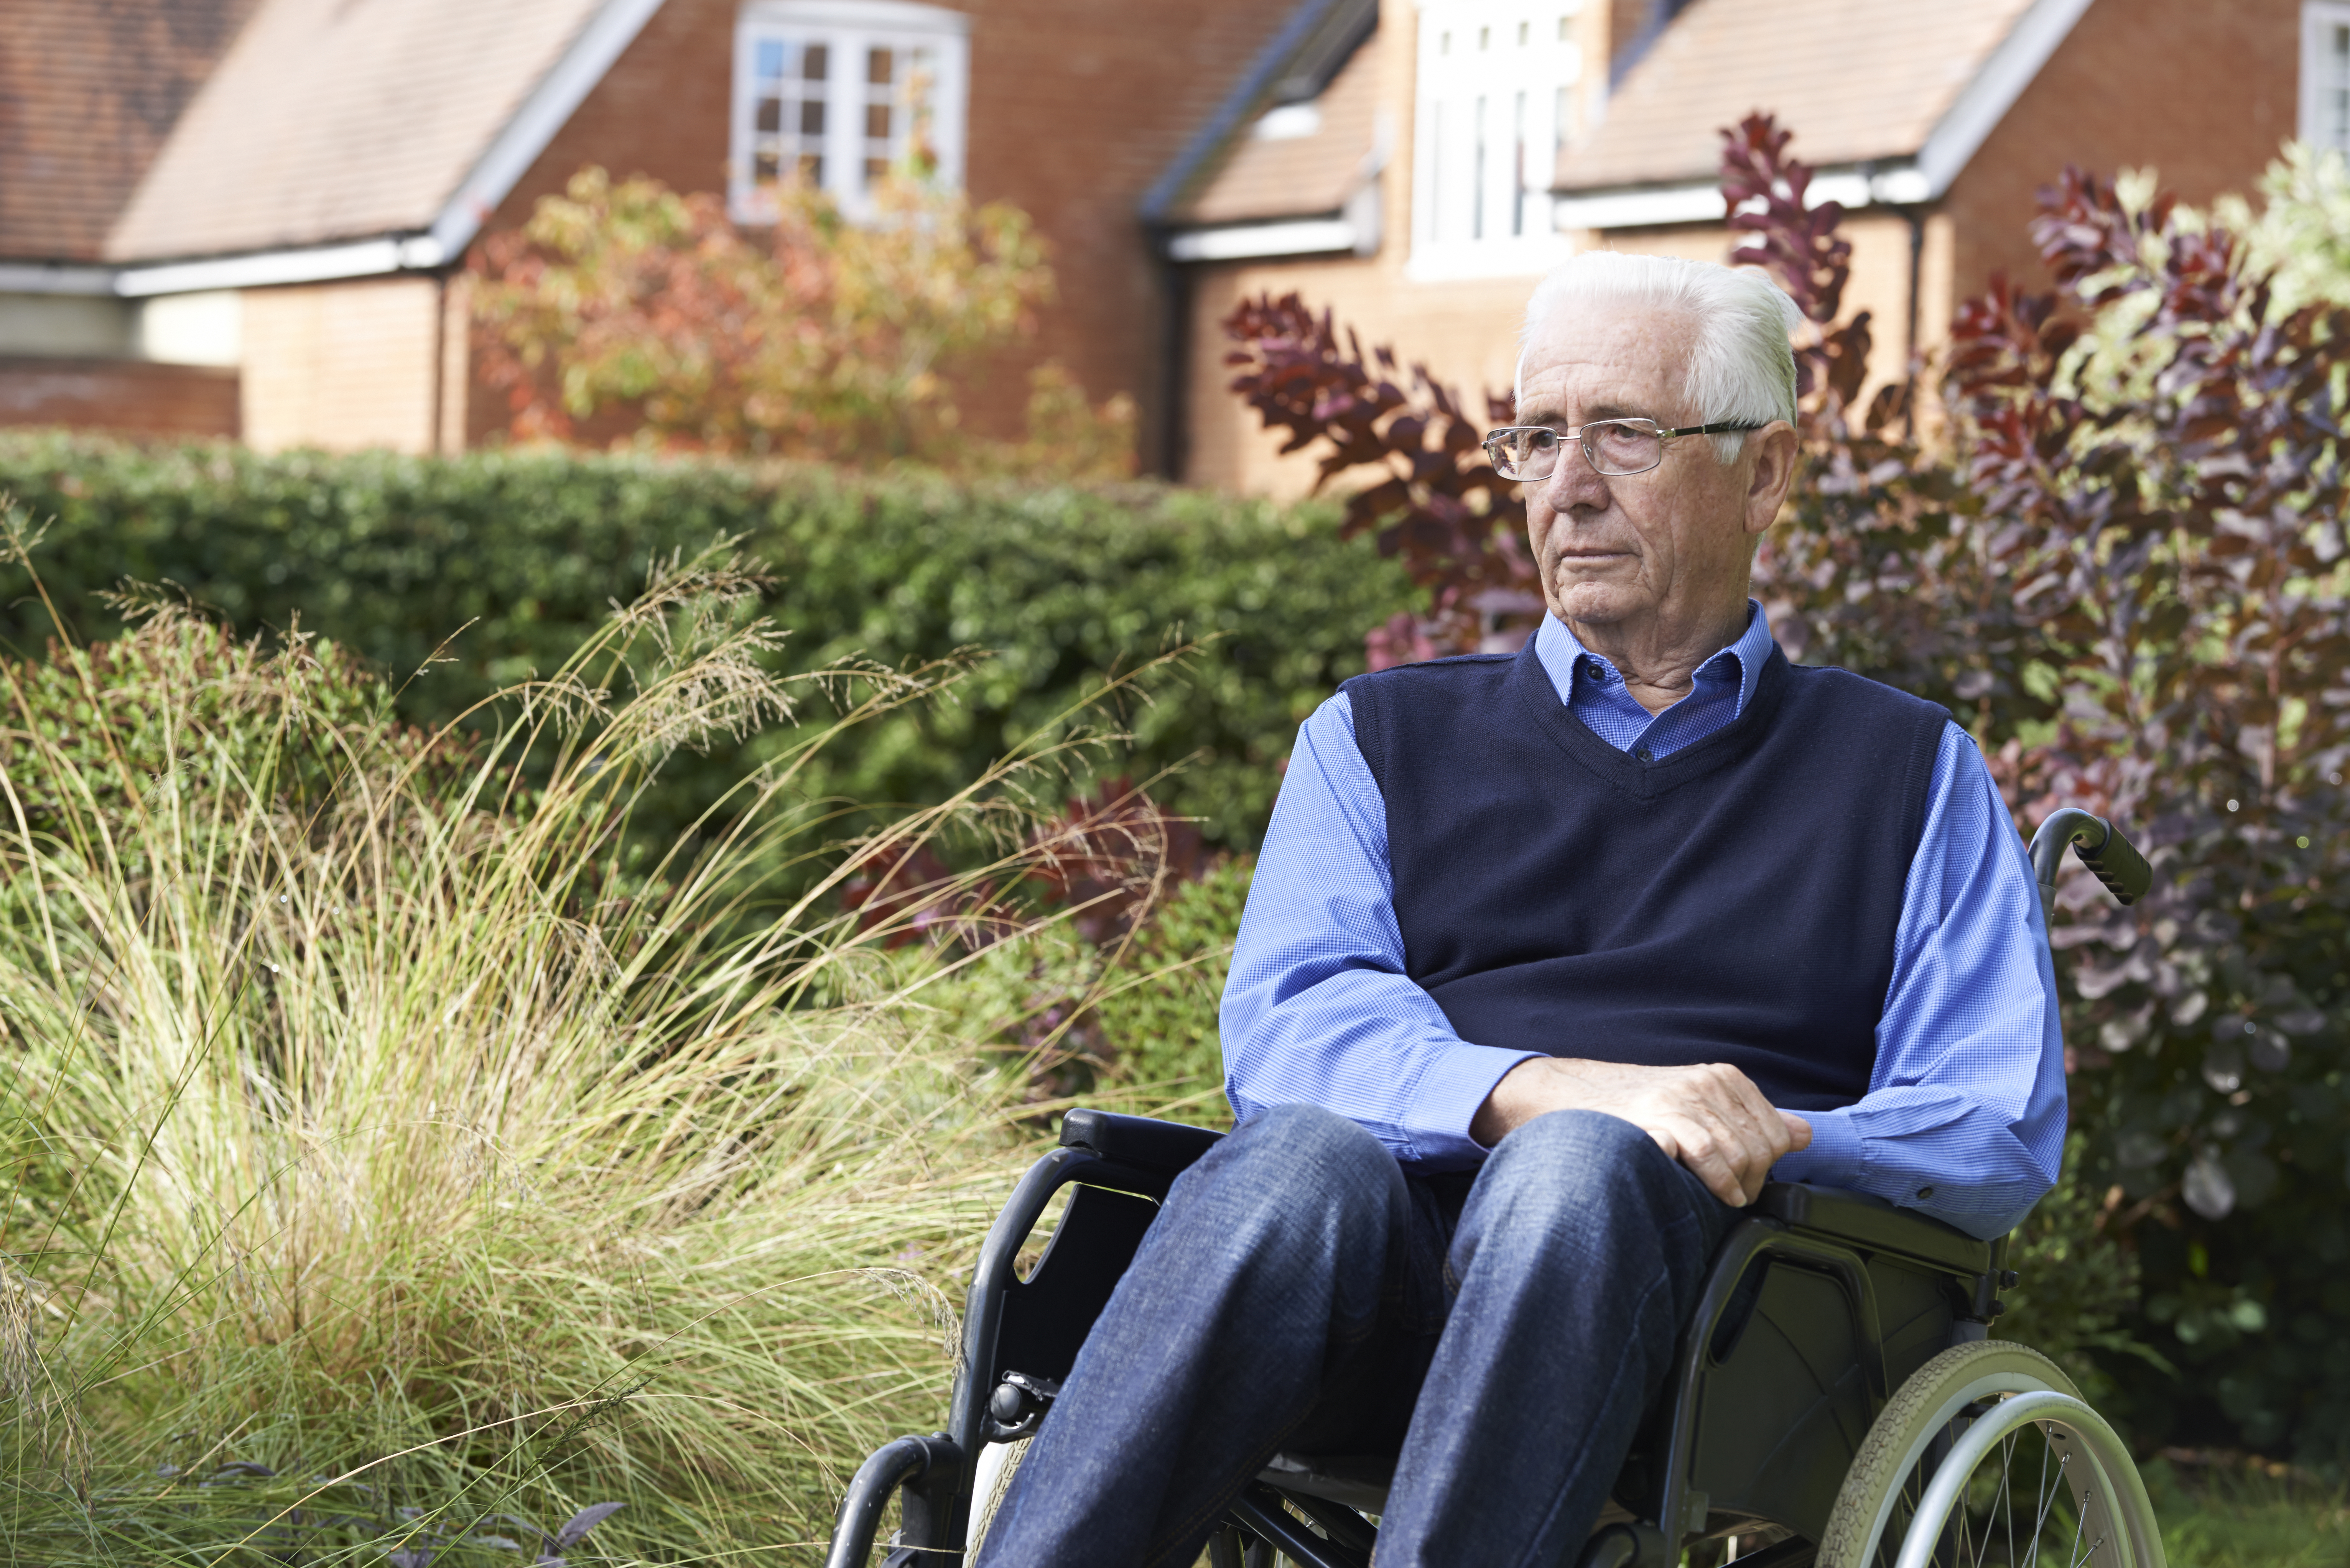 Assisted Living for People With Mental Health Disorders